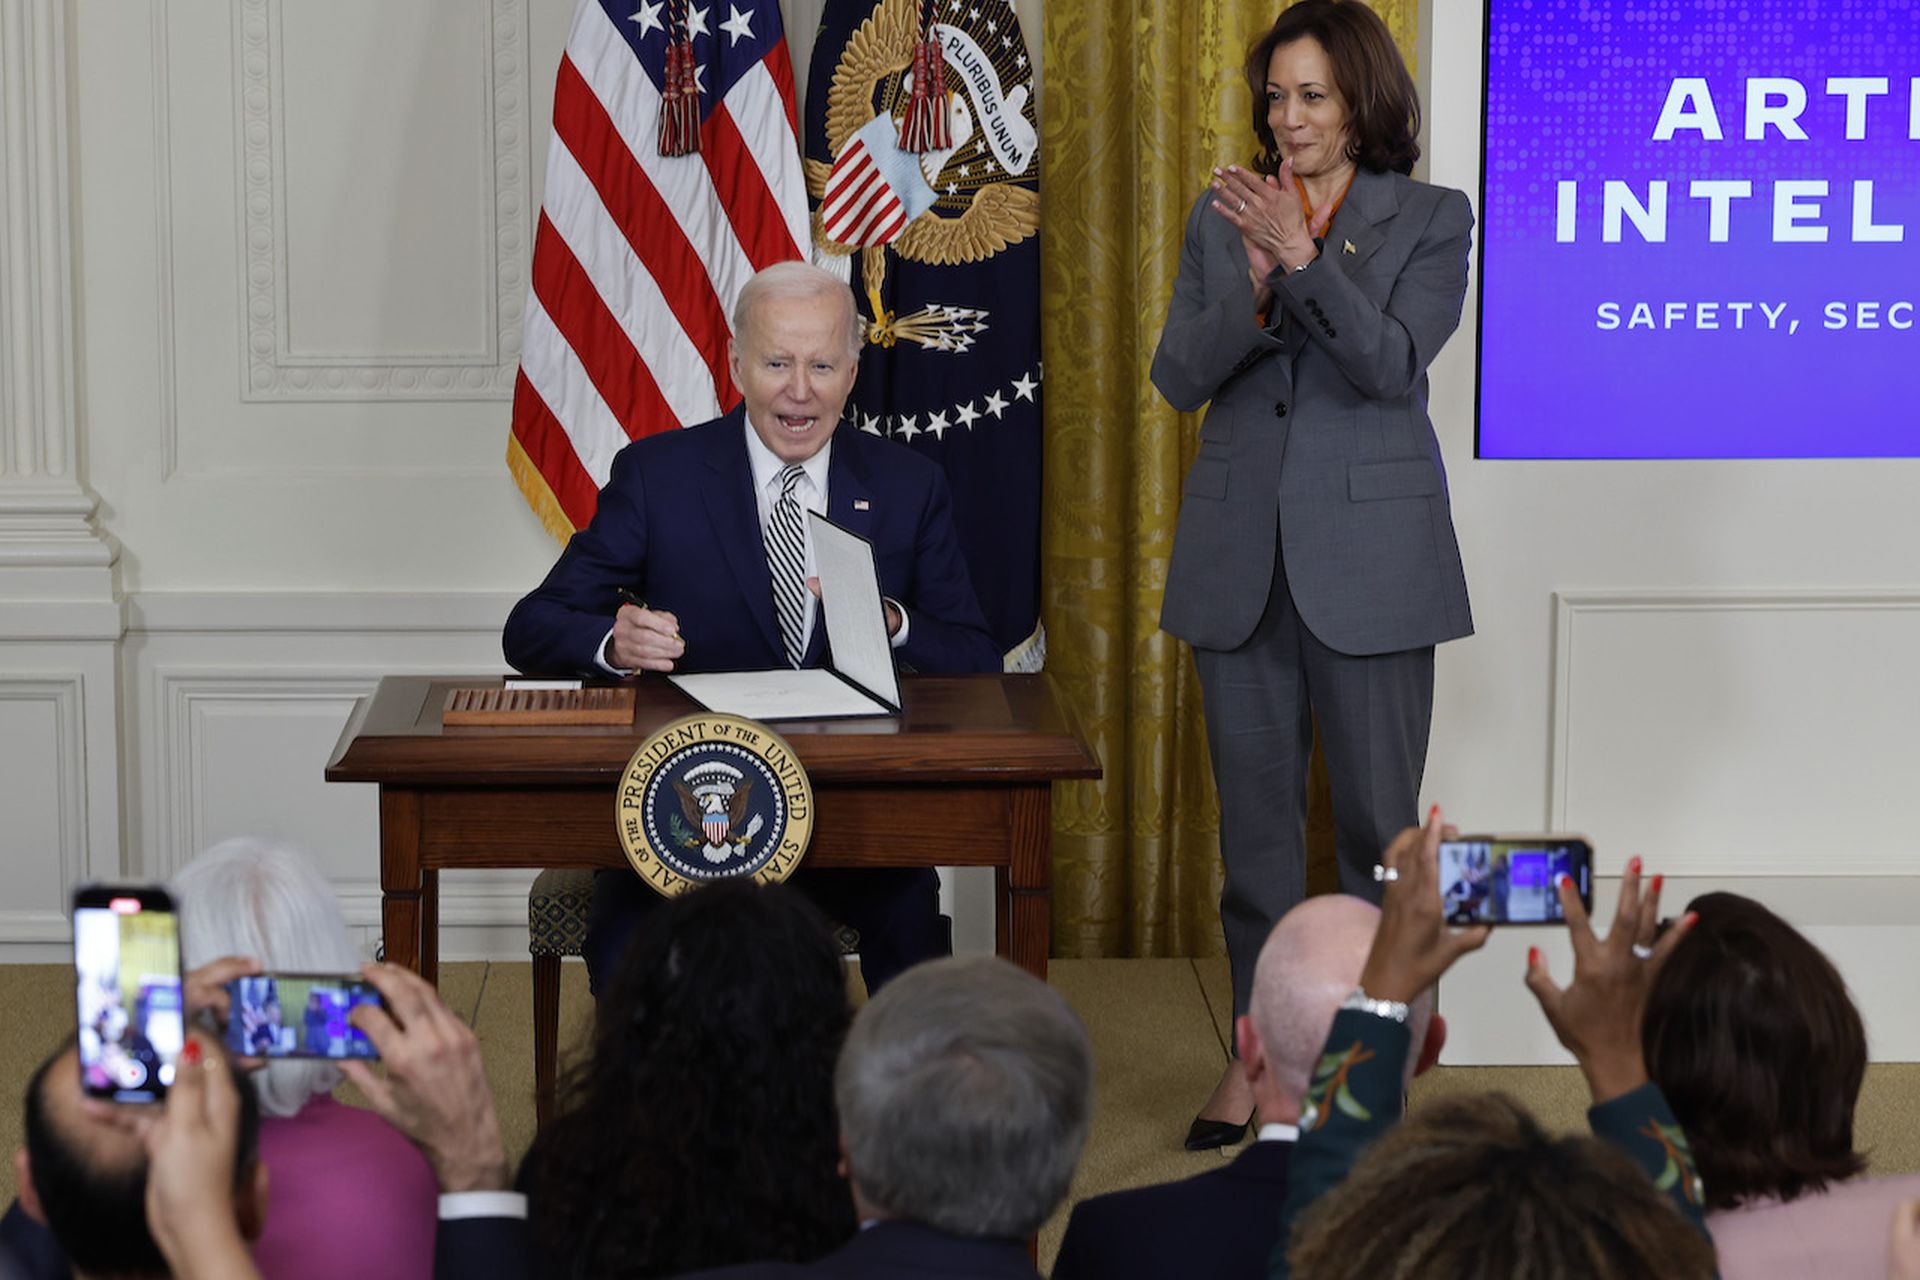 Vice President Kamala Harris looks on as President Biden signs a new executive order on artificial intelligence at the White House on October 30. Today’s columnist, Rick Holland of Reliaquest, offers three proactive steps security teams can take to prepare for coming government mandates around AI. (Photo by Chip Somodevilla/Getty Images)